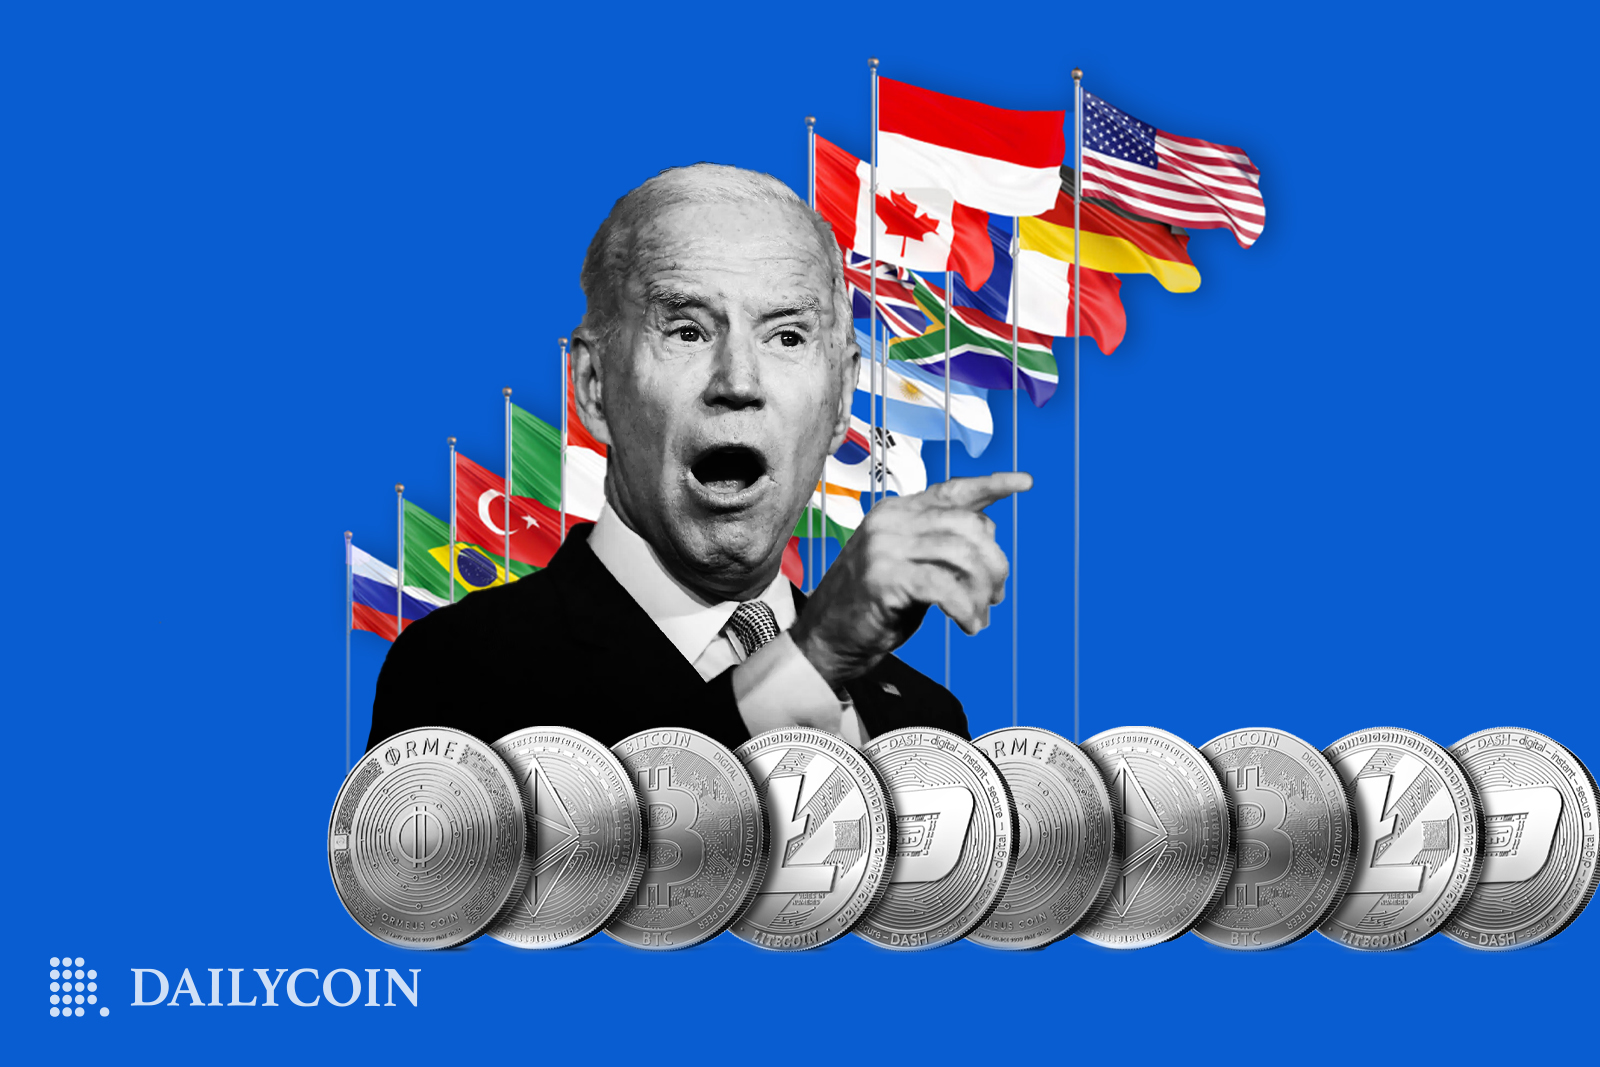 Joe Biden is giving a speech behind crypto coins on a blue background with flags